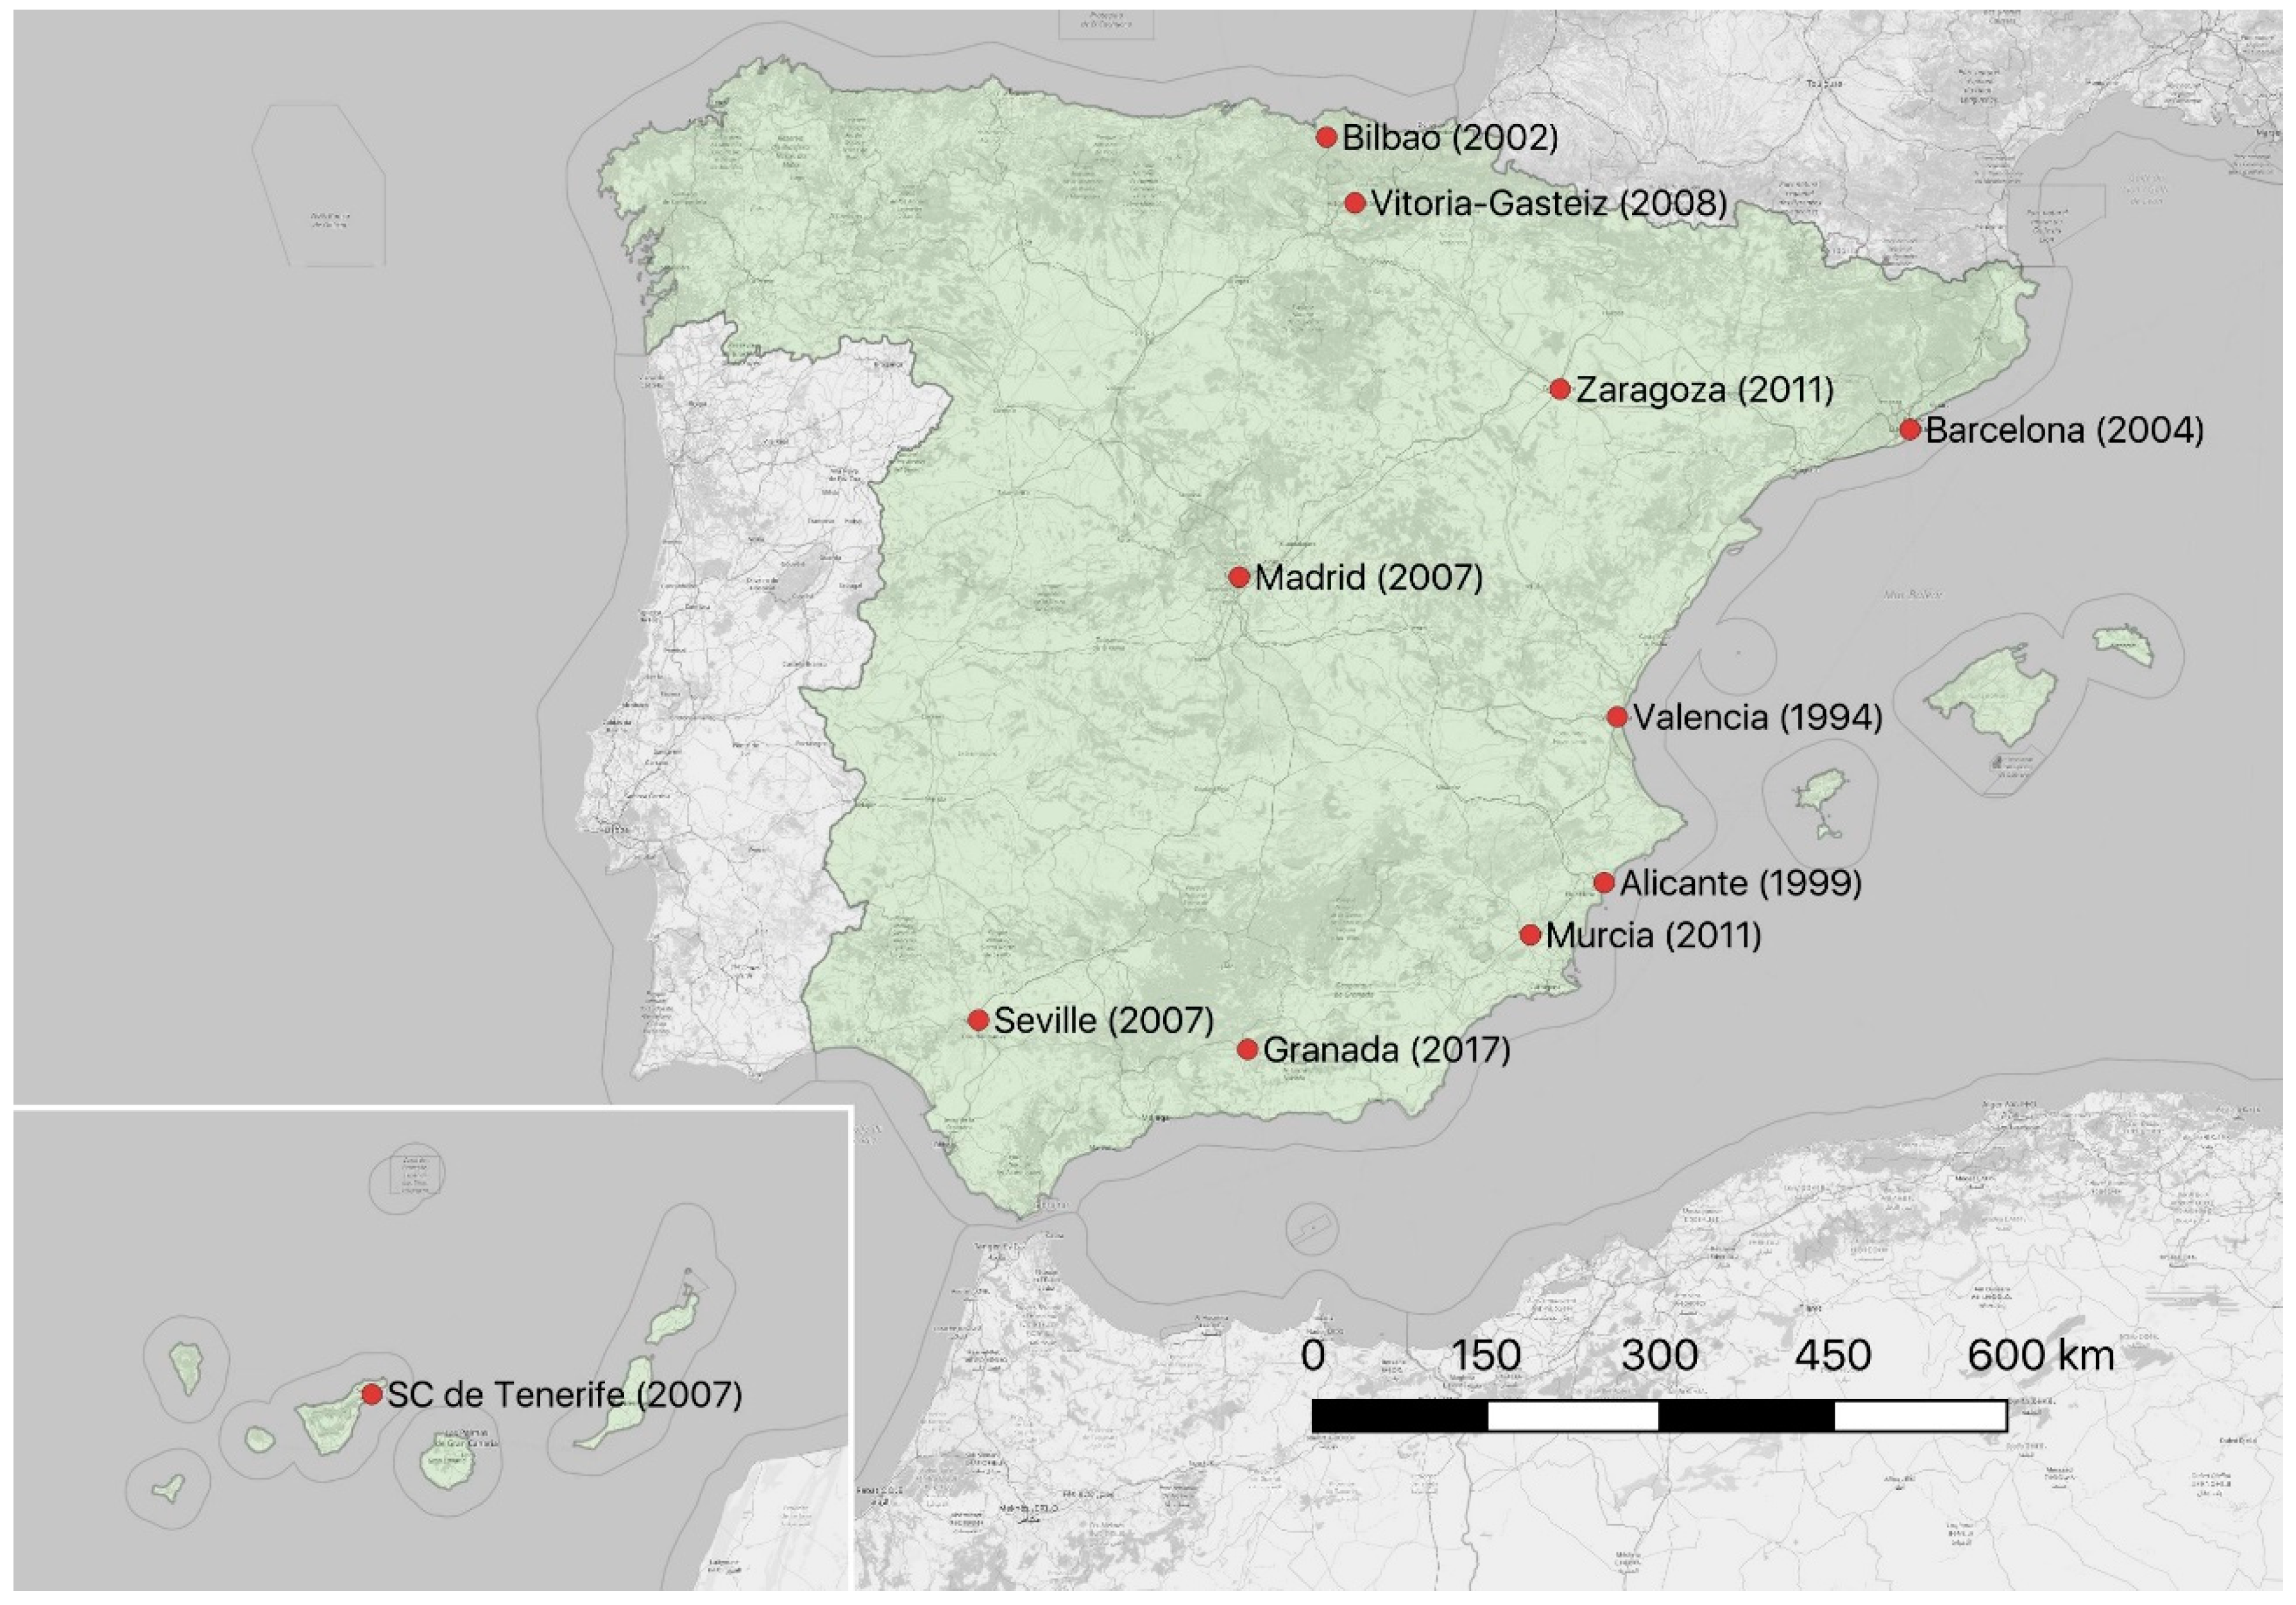 Applied Sciences Free Full Text A Gis Based Analysis Of The Light Rail Transit Systems In Spain Html